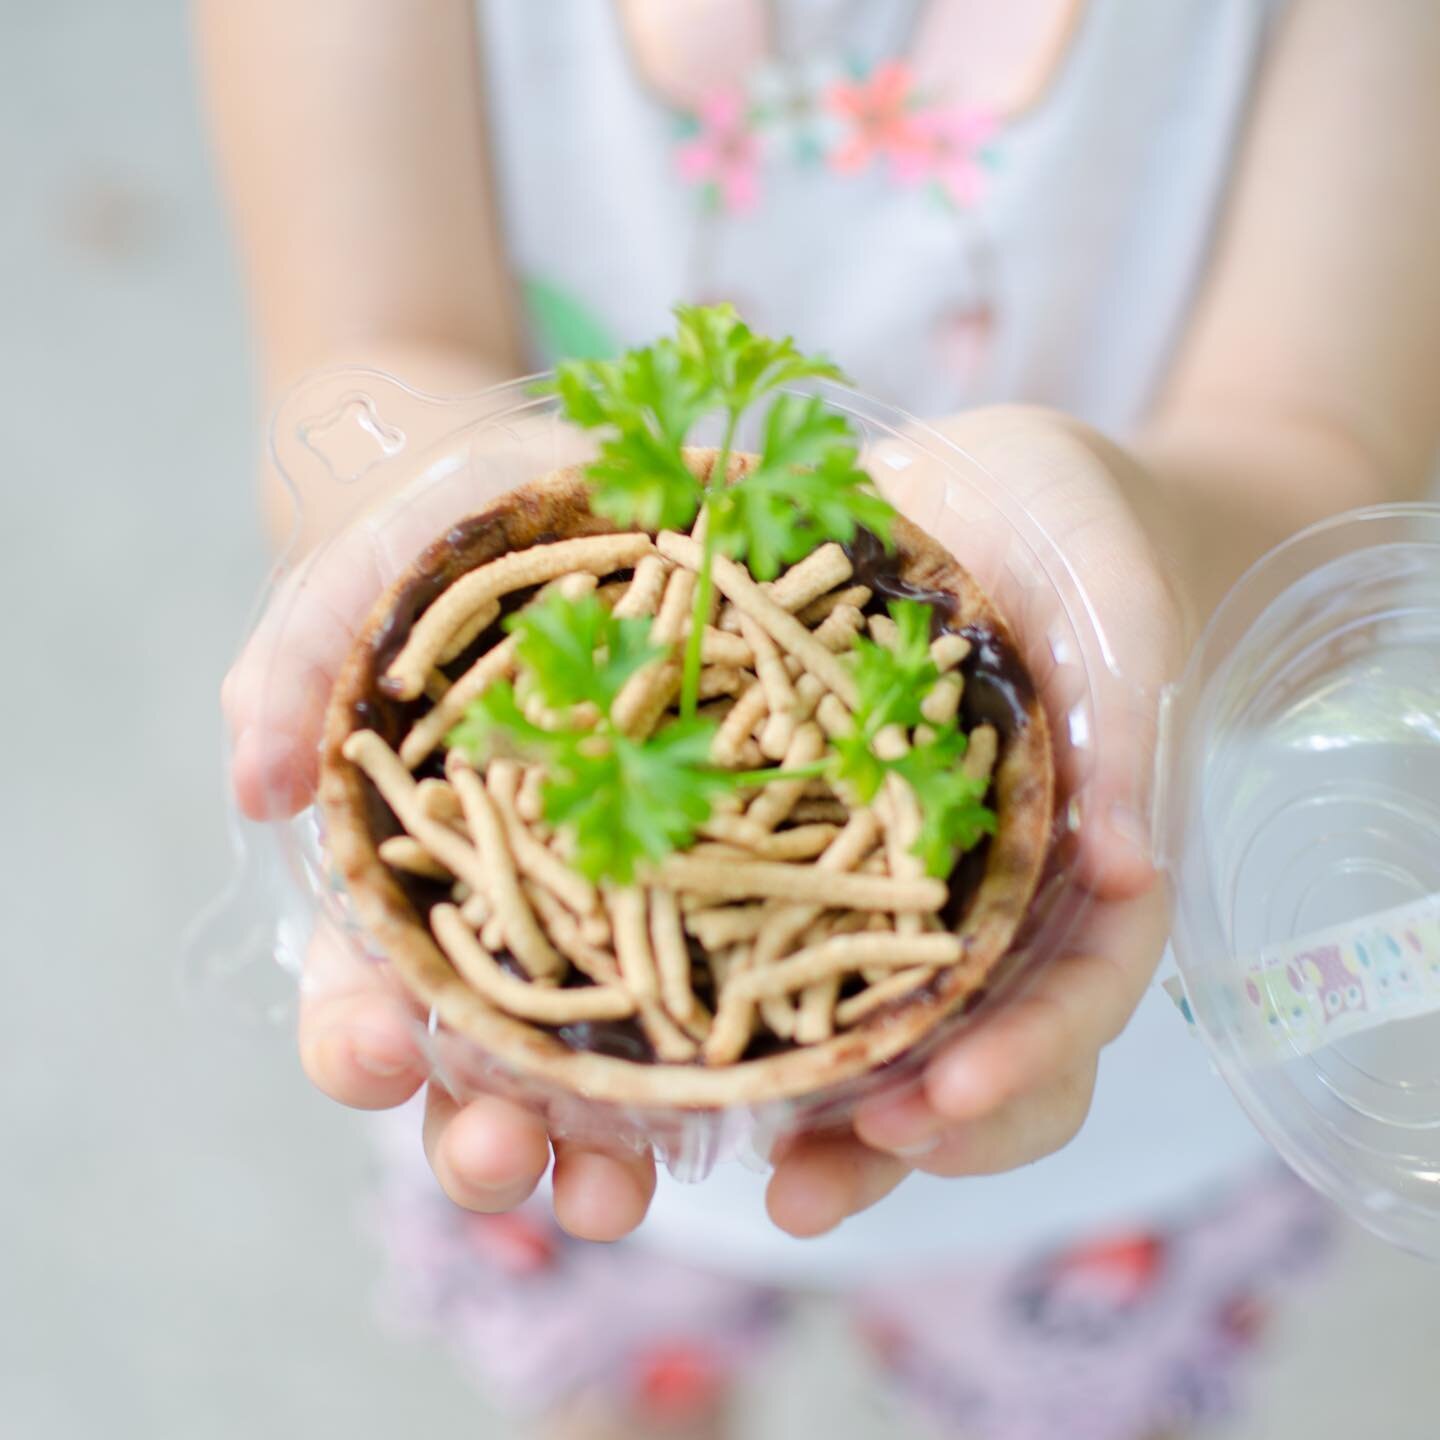 DIY: Edible Mud Pies for Passover (and Spring too)! 🌺🌿🌱

We&rsquo;re getting ready for Passover today by &ldquo;planting&rdquo; parsley in yummy mud pies. 😋 We need wonderful gooey mud to grow parsley for our Seder plate! To &ldquo;plant&rdquo; p